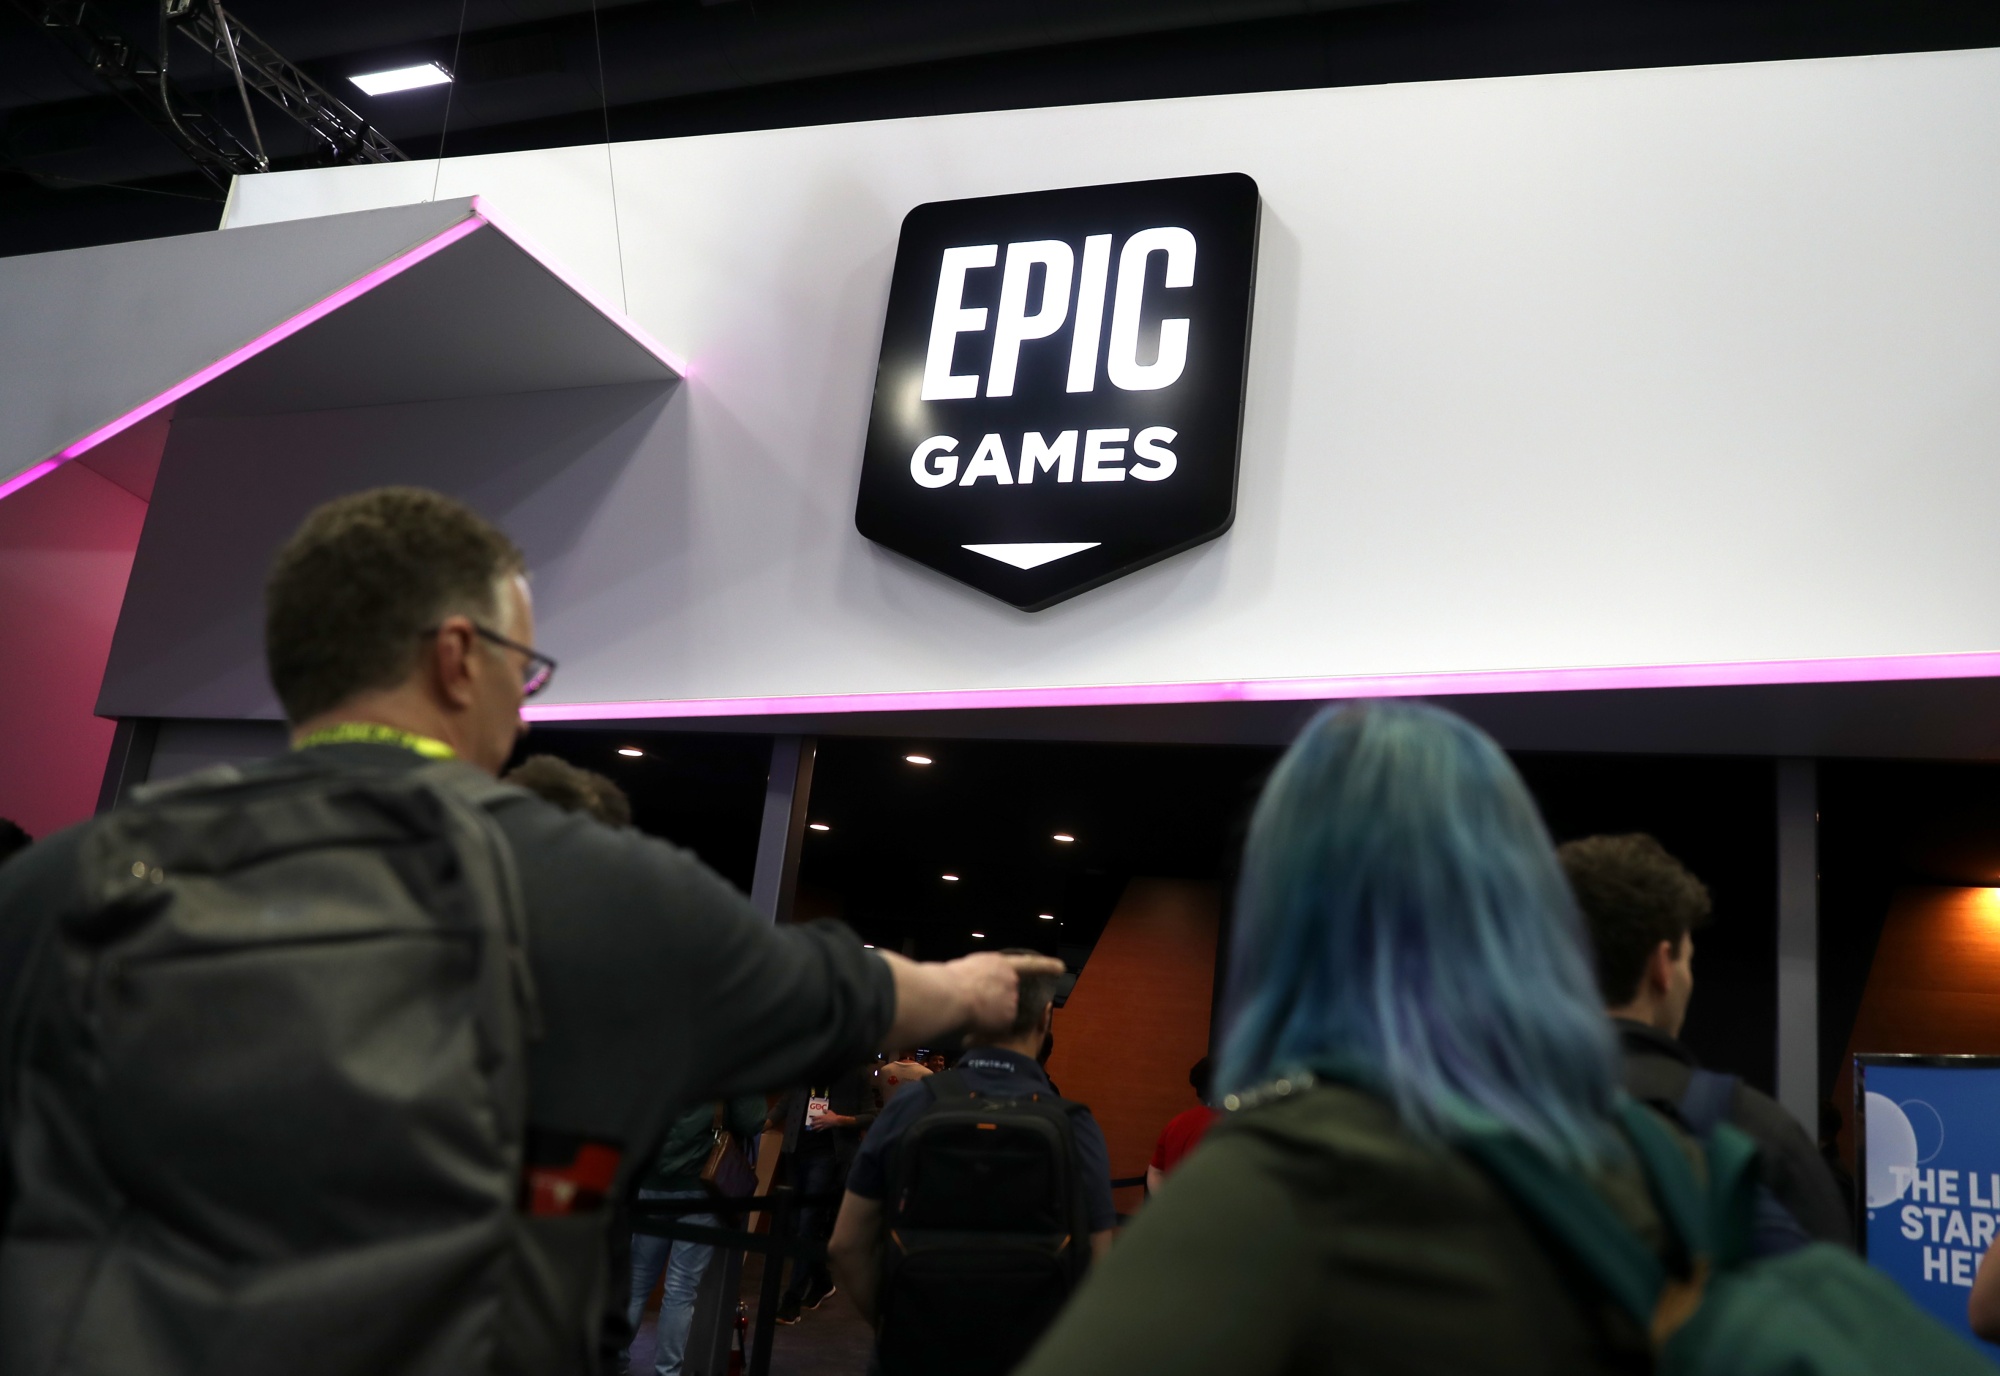 Report: Epic Games Business Breakdown & Founding Story